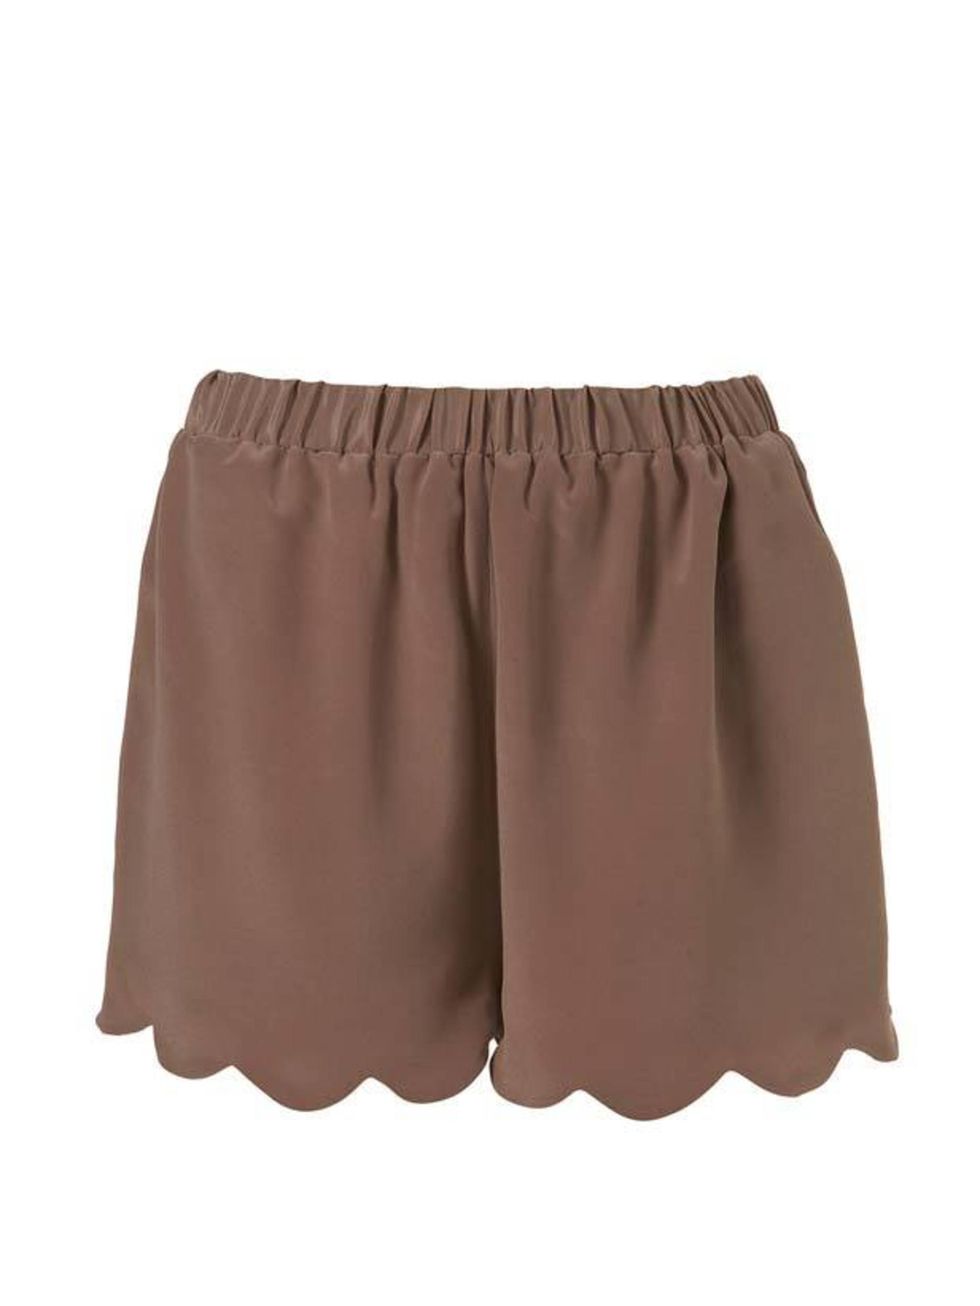 <p>Feminine and sophisticated, these scallop edged shorts tap into the Chloe look we all so love and will see you through to next season<a href="http://www.topshop.com/webapp/wcs/stores/servlet/ProductDisplay?beginIndex=0&amp;viewAllFlag=&amp;langId=-1&a